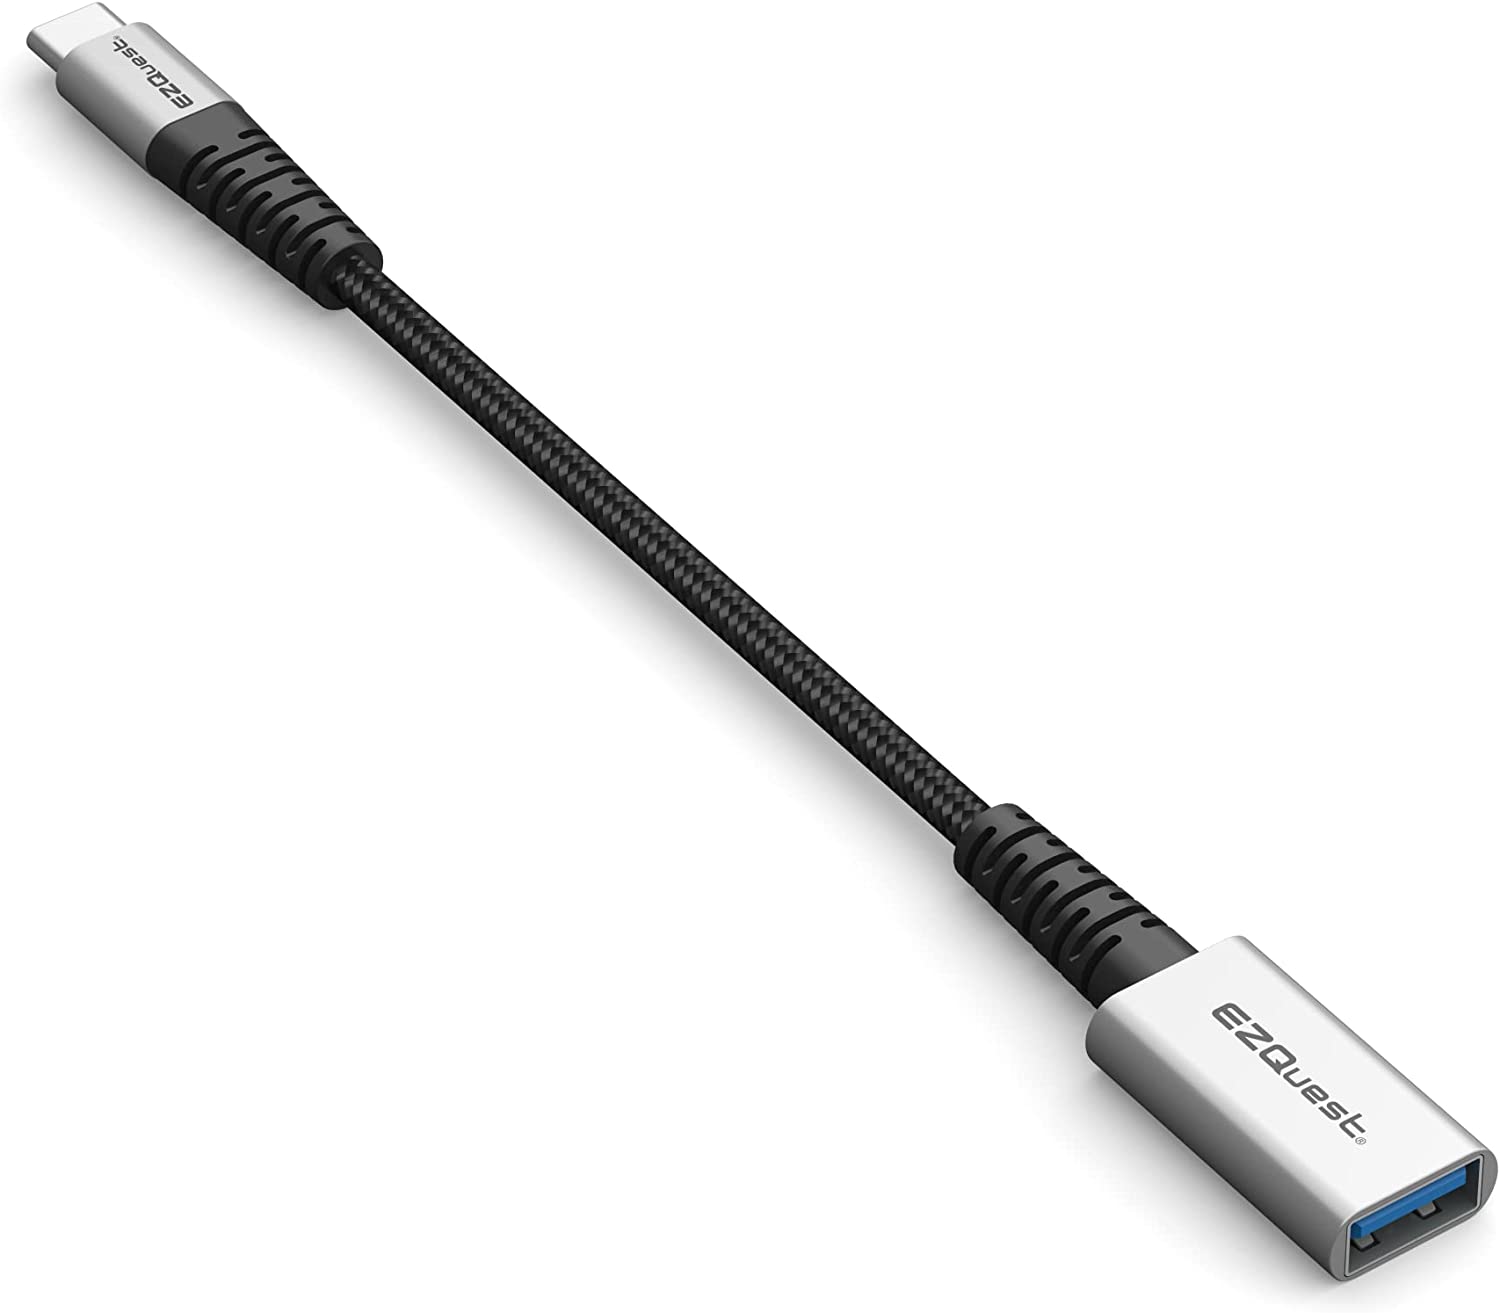 Ezquest DuraGuard™ USB-C to USB-A 3.0 Female Cable Adapter